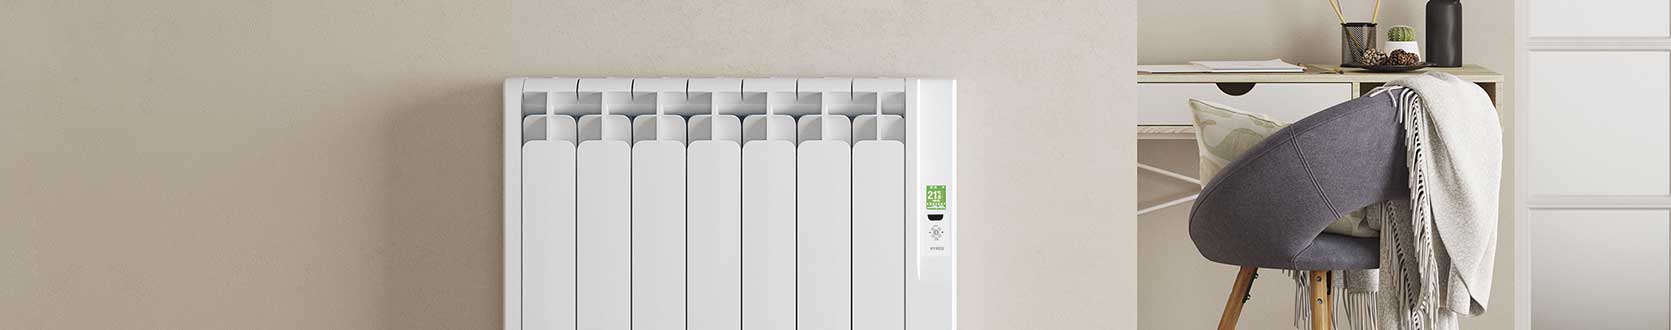 Rointe Kyros smart timer electric radiator in white wall mounted in living room